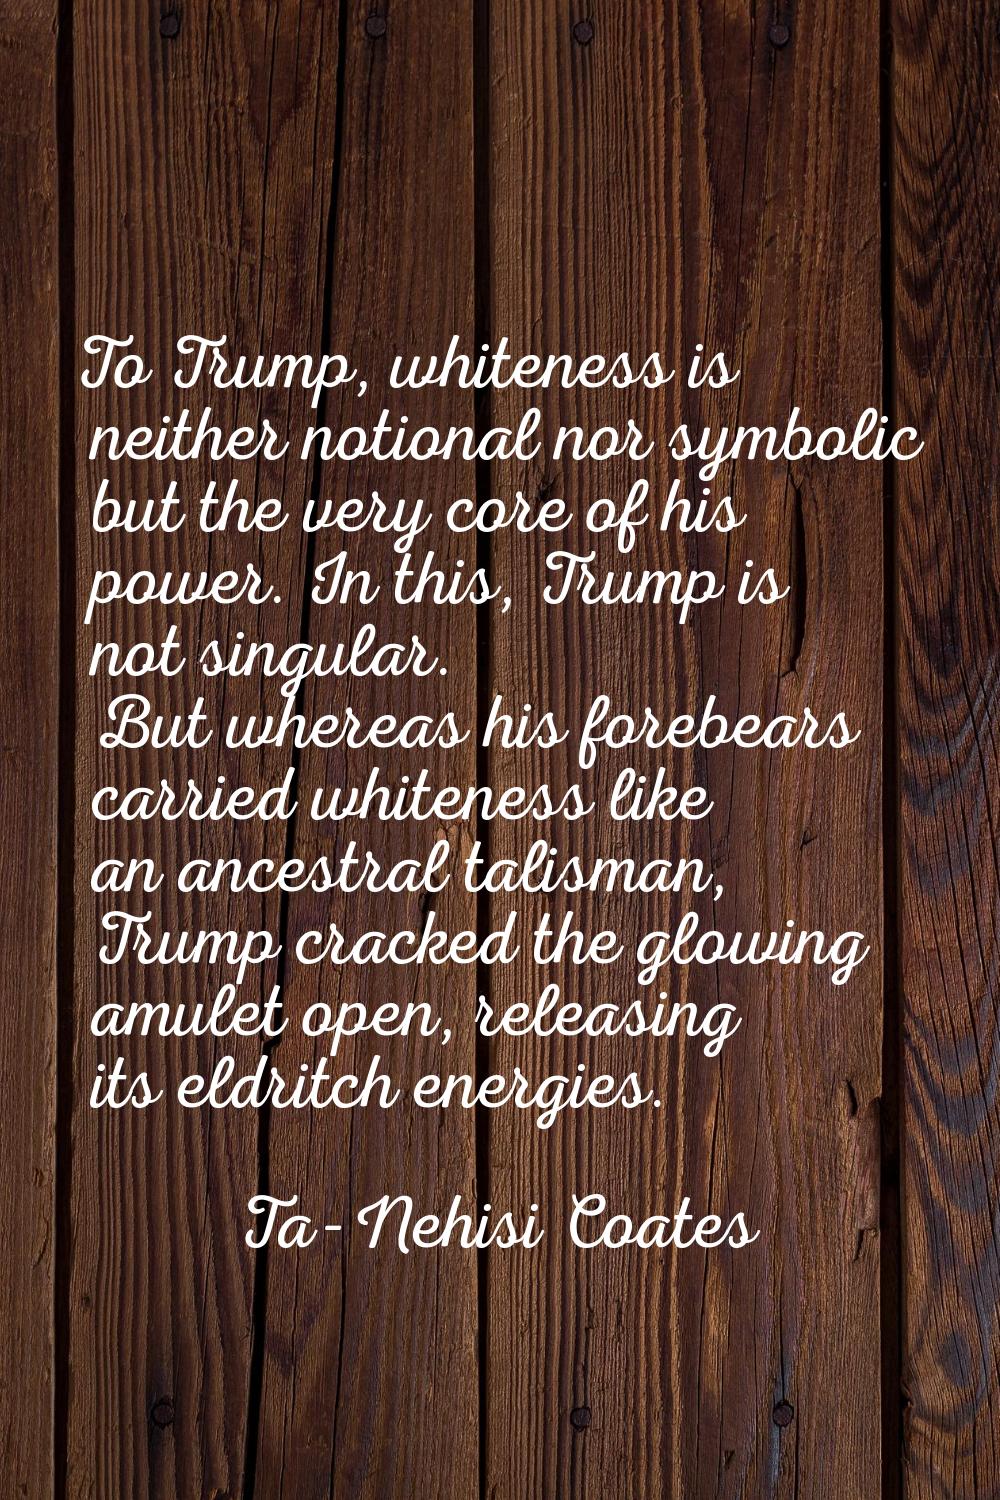 To Trump, whiteness is neither notional nor symbolic but the very core of his power. In this, Trump